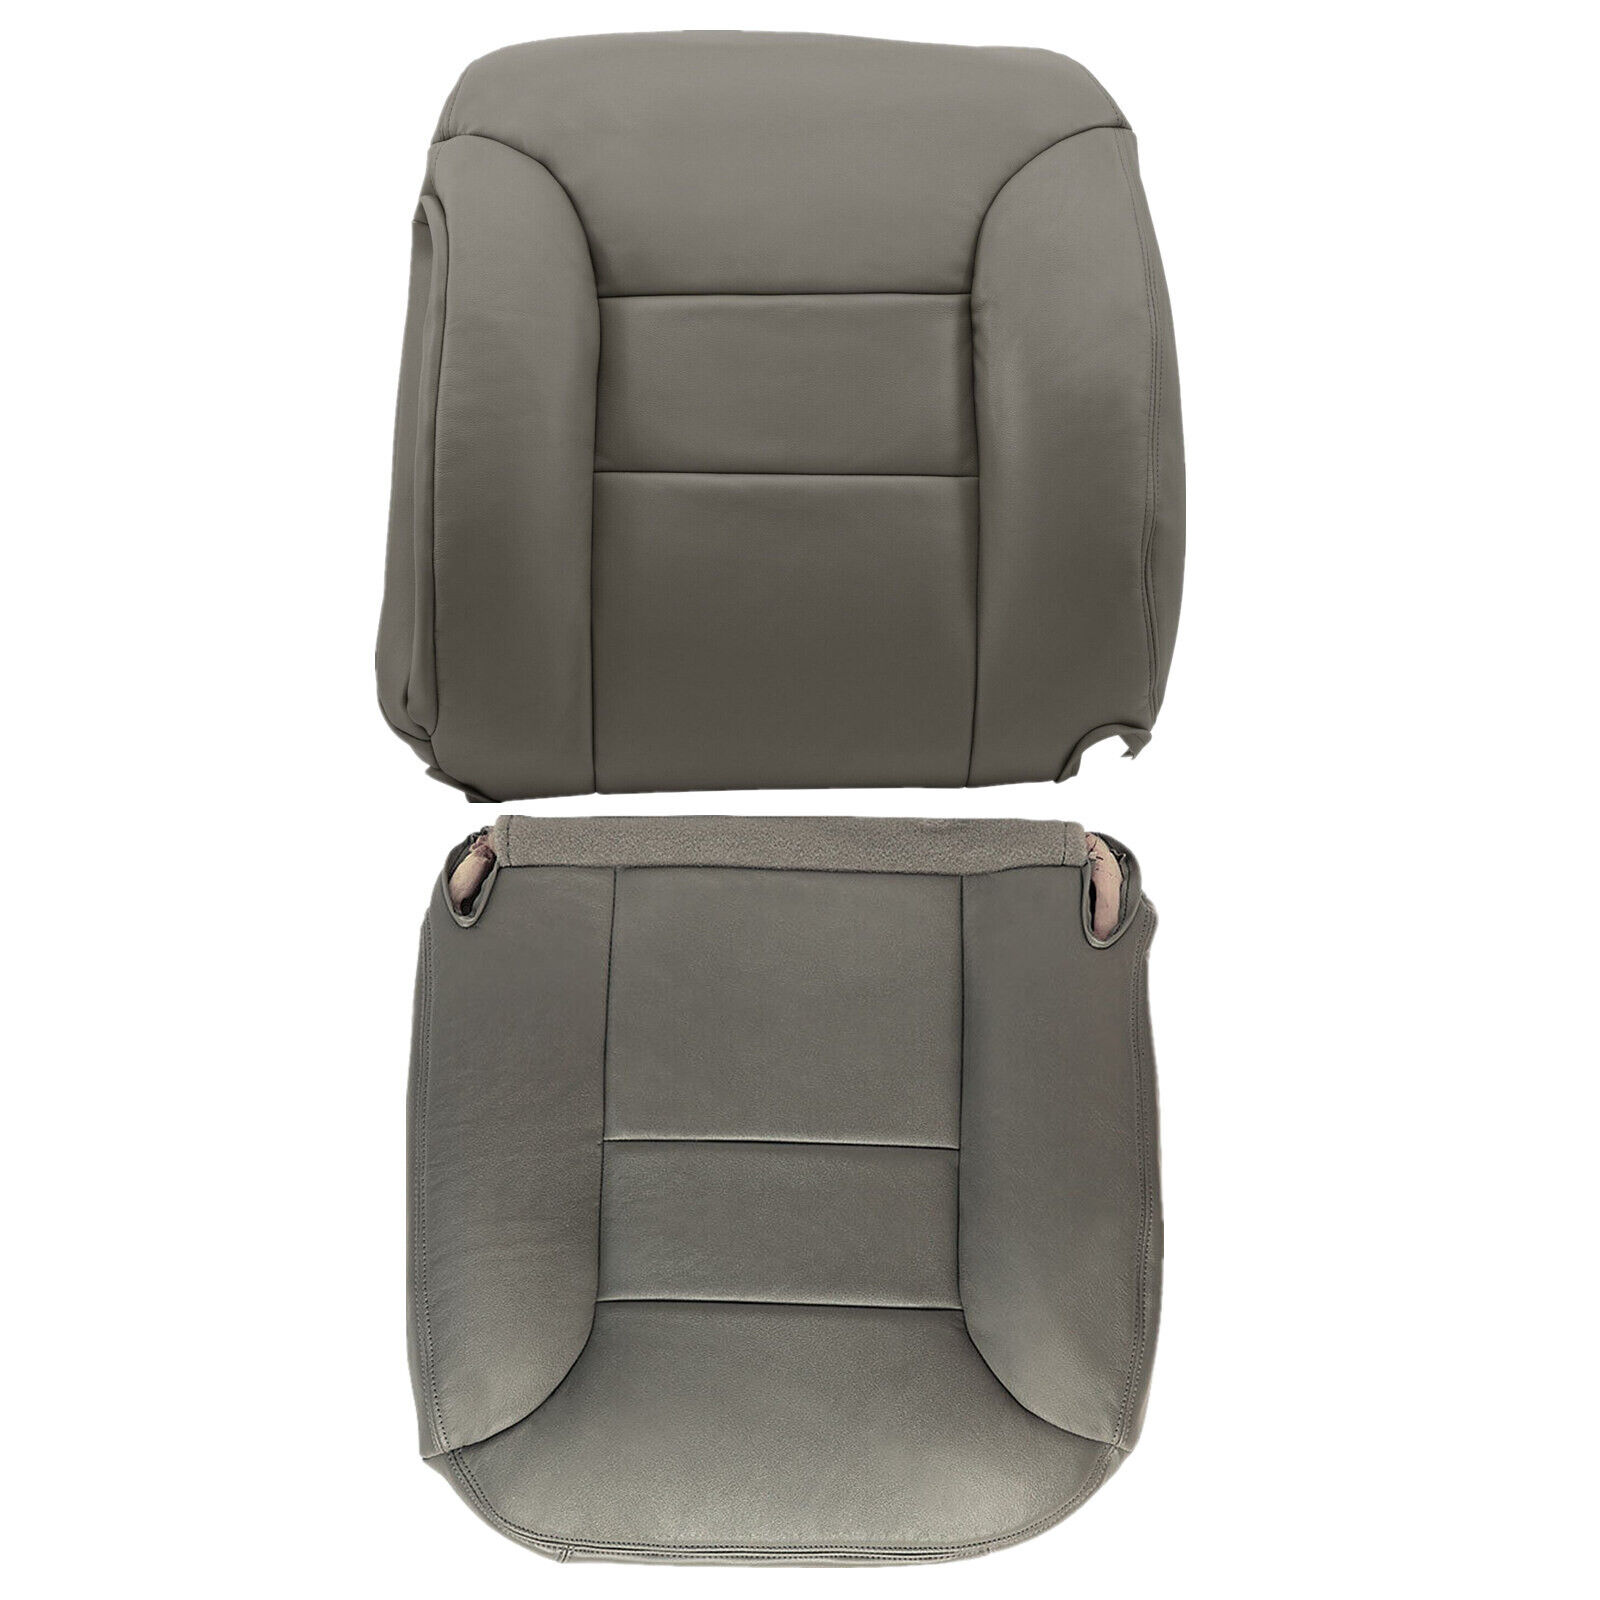 For 1995 1996 1997 1998 1999 GMC Yukon Chevy Tahoe Front Bottom Top Seat Cover